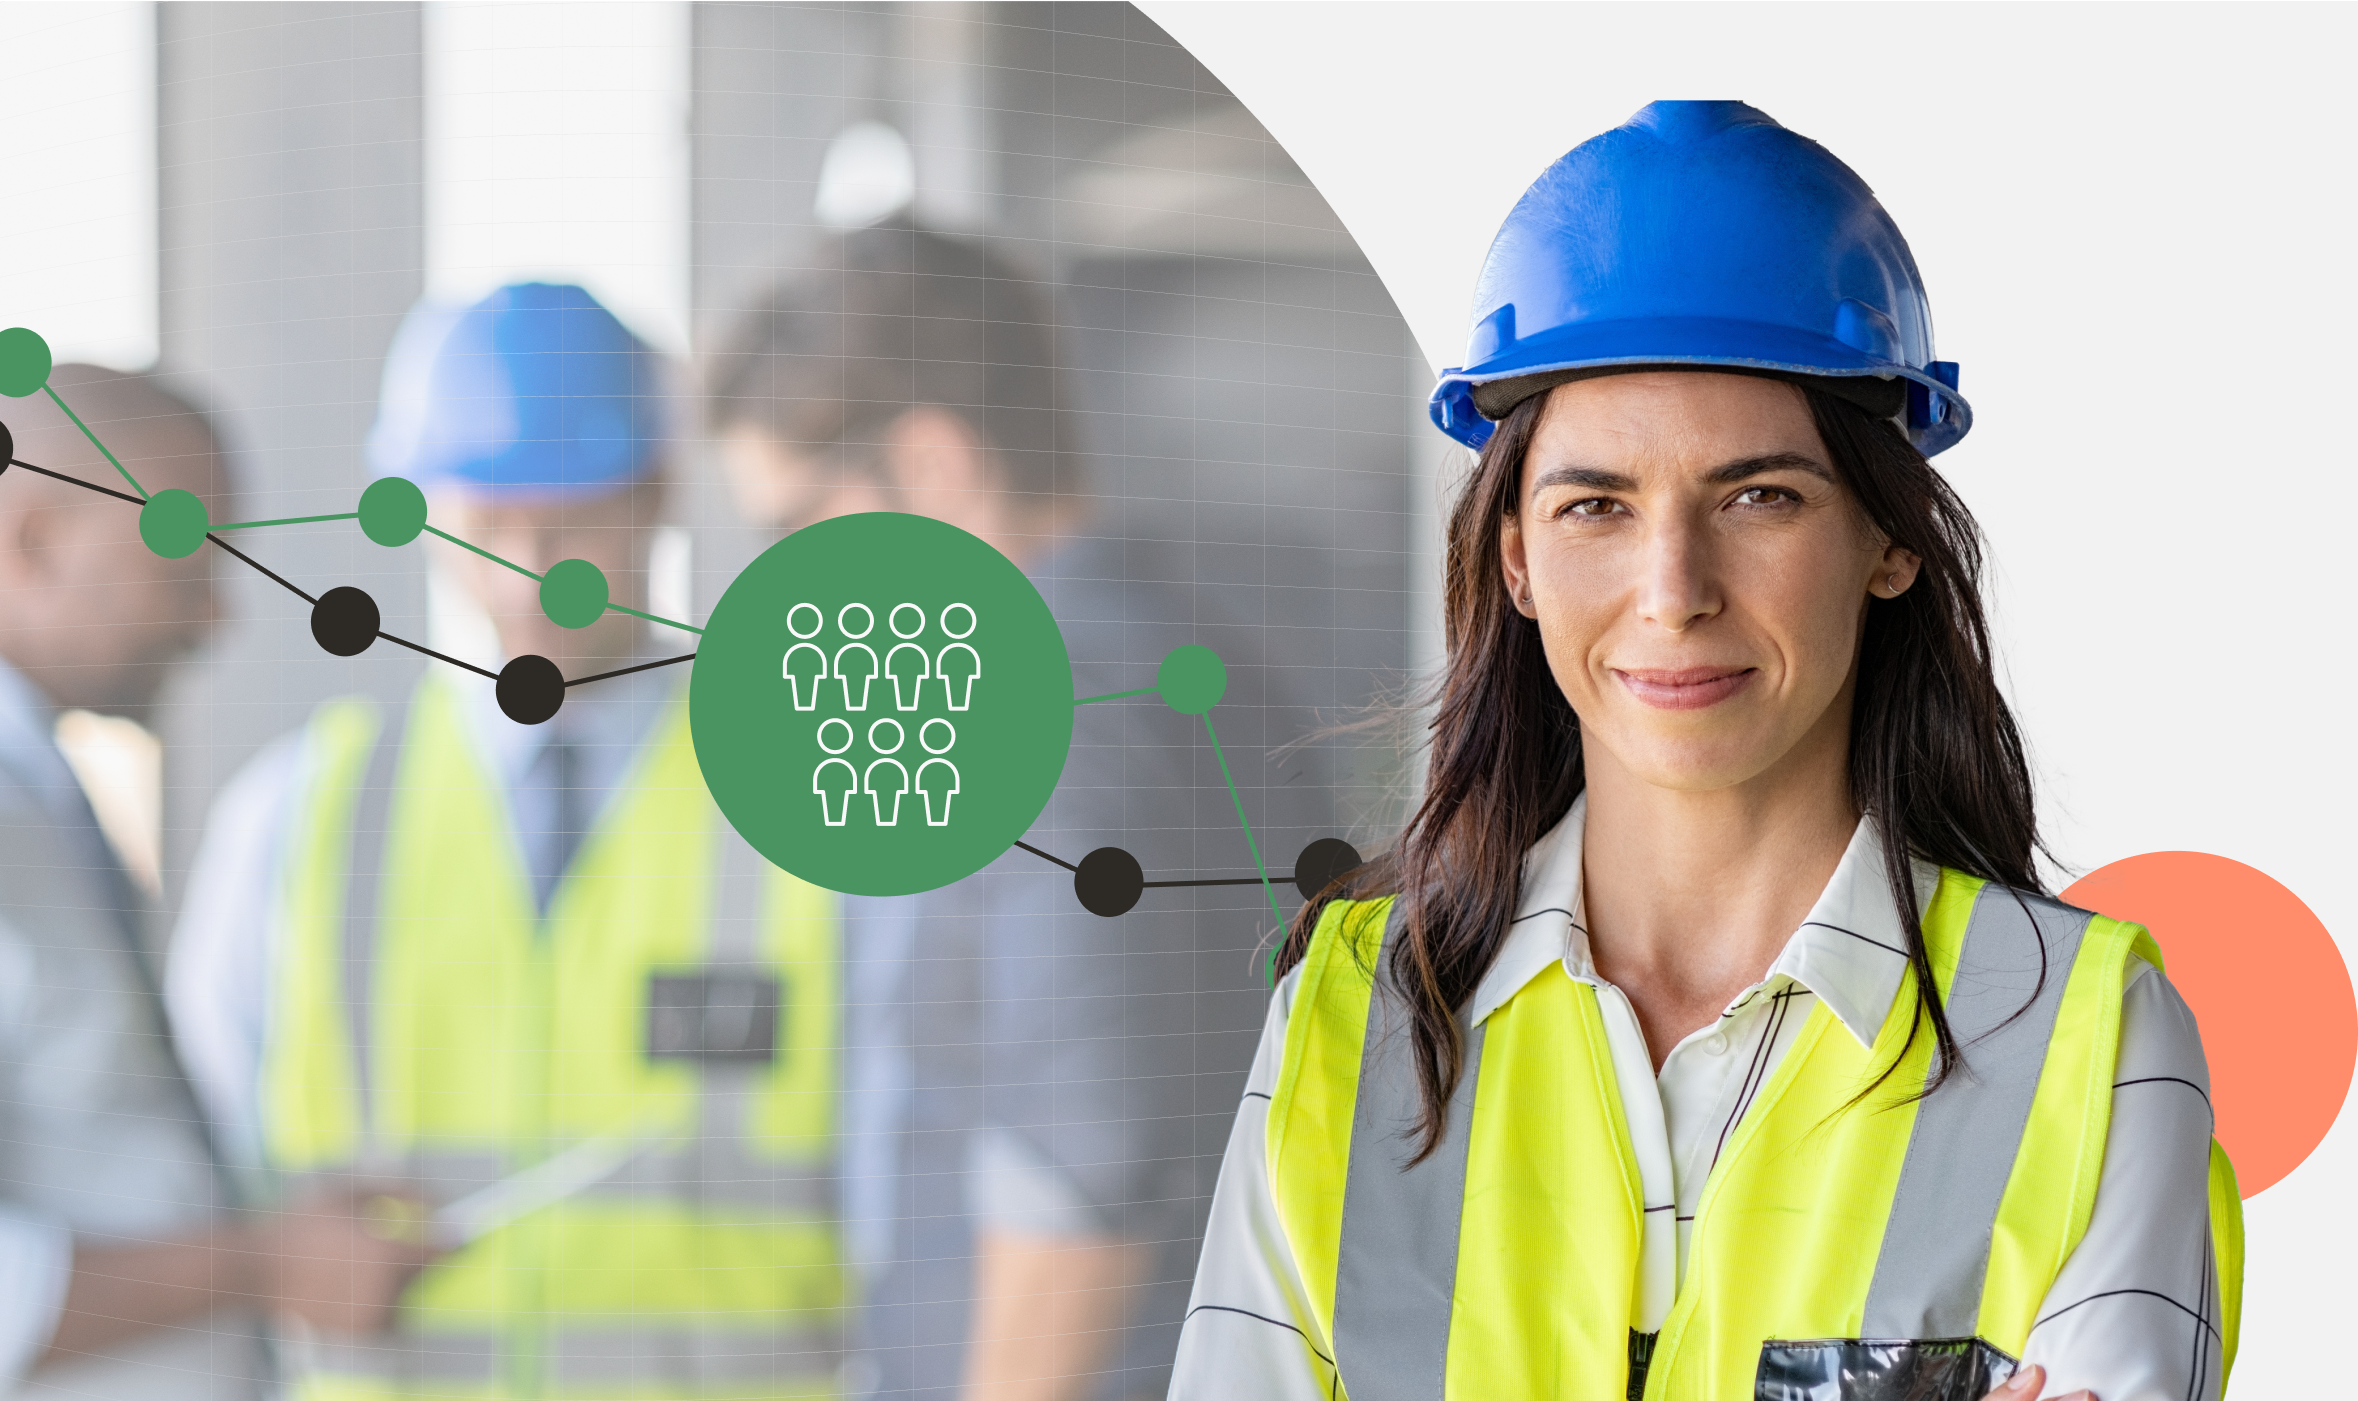 Image of a woman wearing a safety hat on a job site with coworkers in the background and a FTE graphic